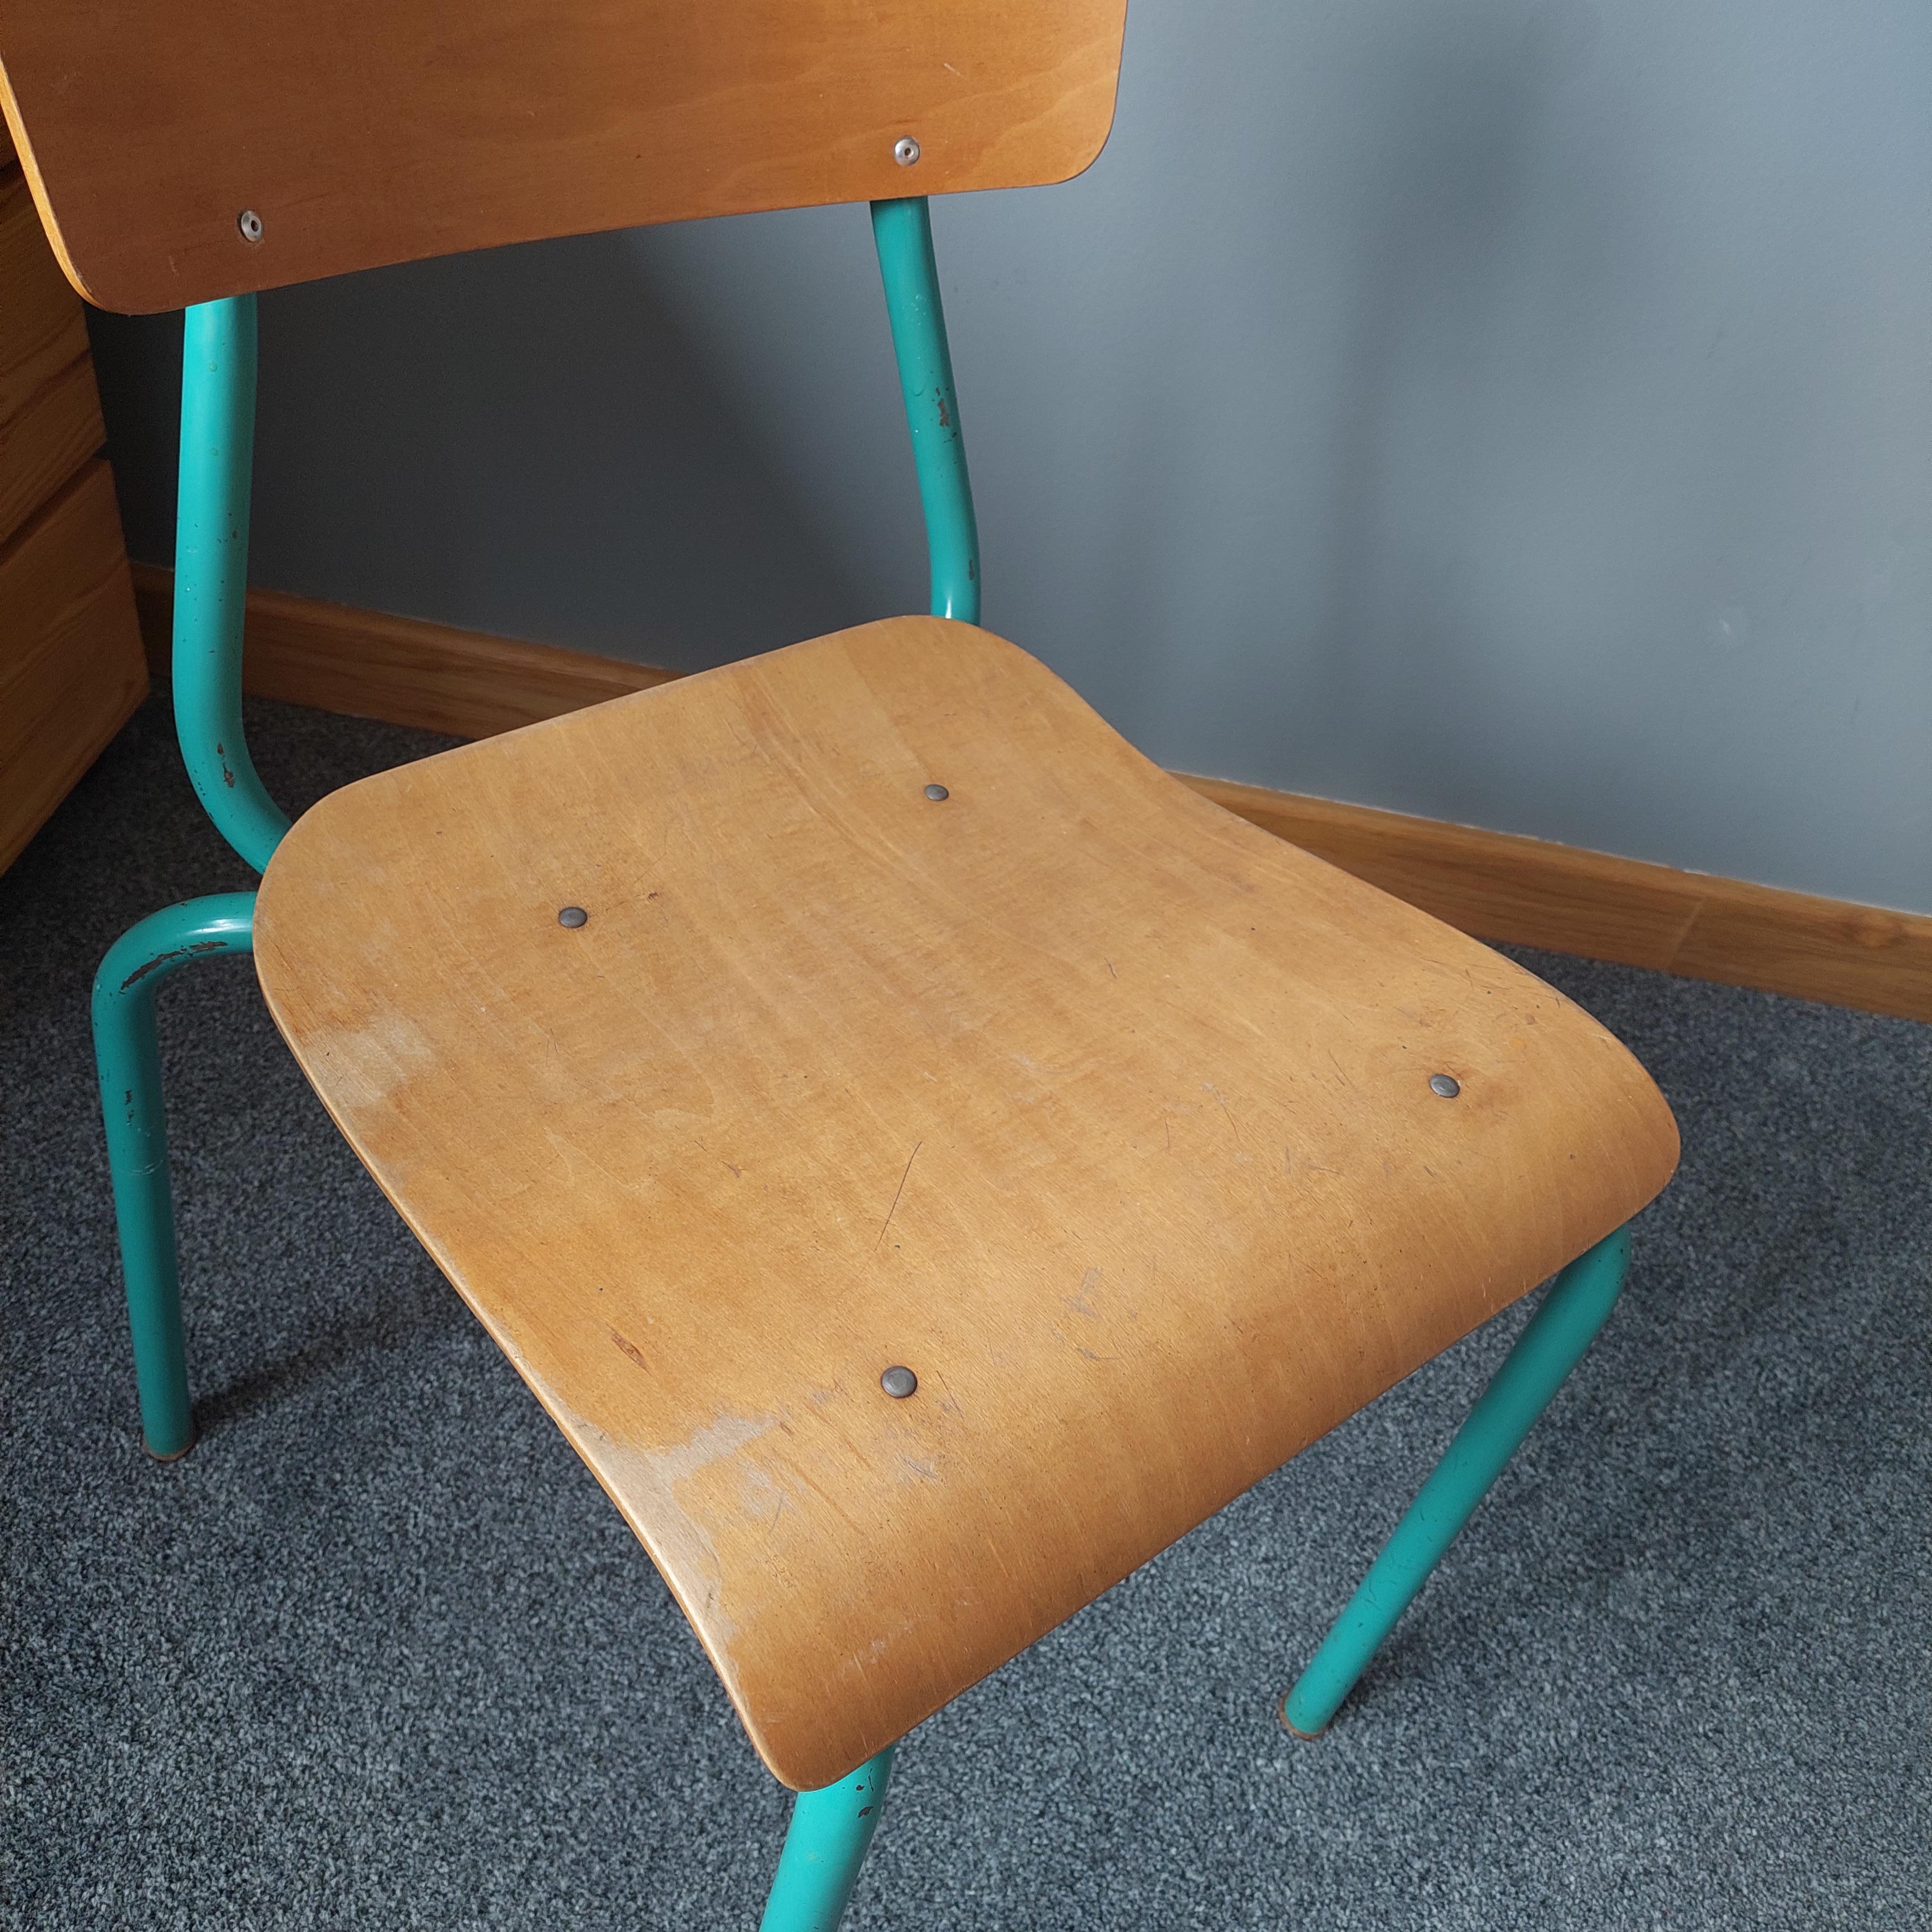 Midcentury 50s Industrial School Adult Size Chair Metal and Plywood Vintage Ret 3